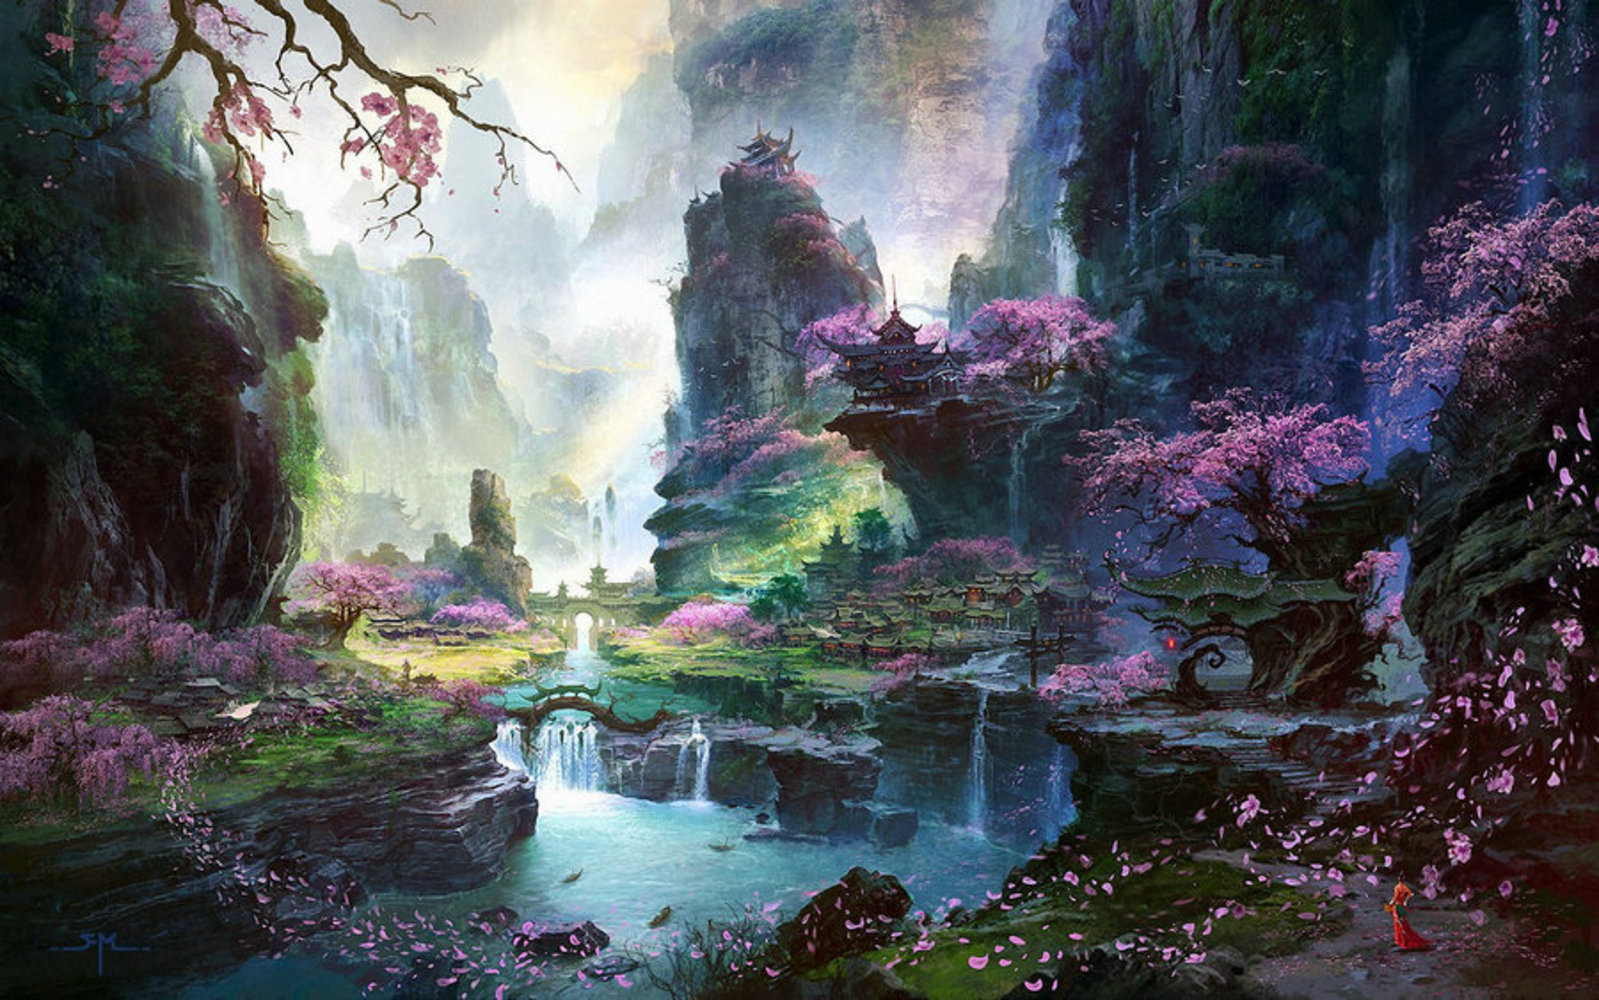 Wonderland in the chinese mountains wallpaper 1920x1200.thumb